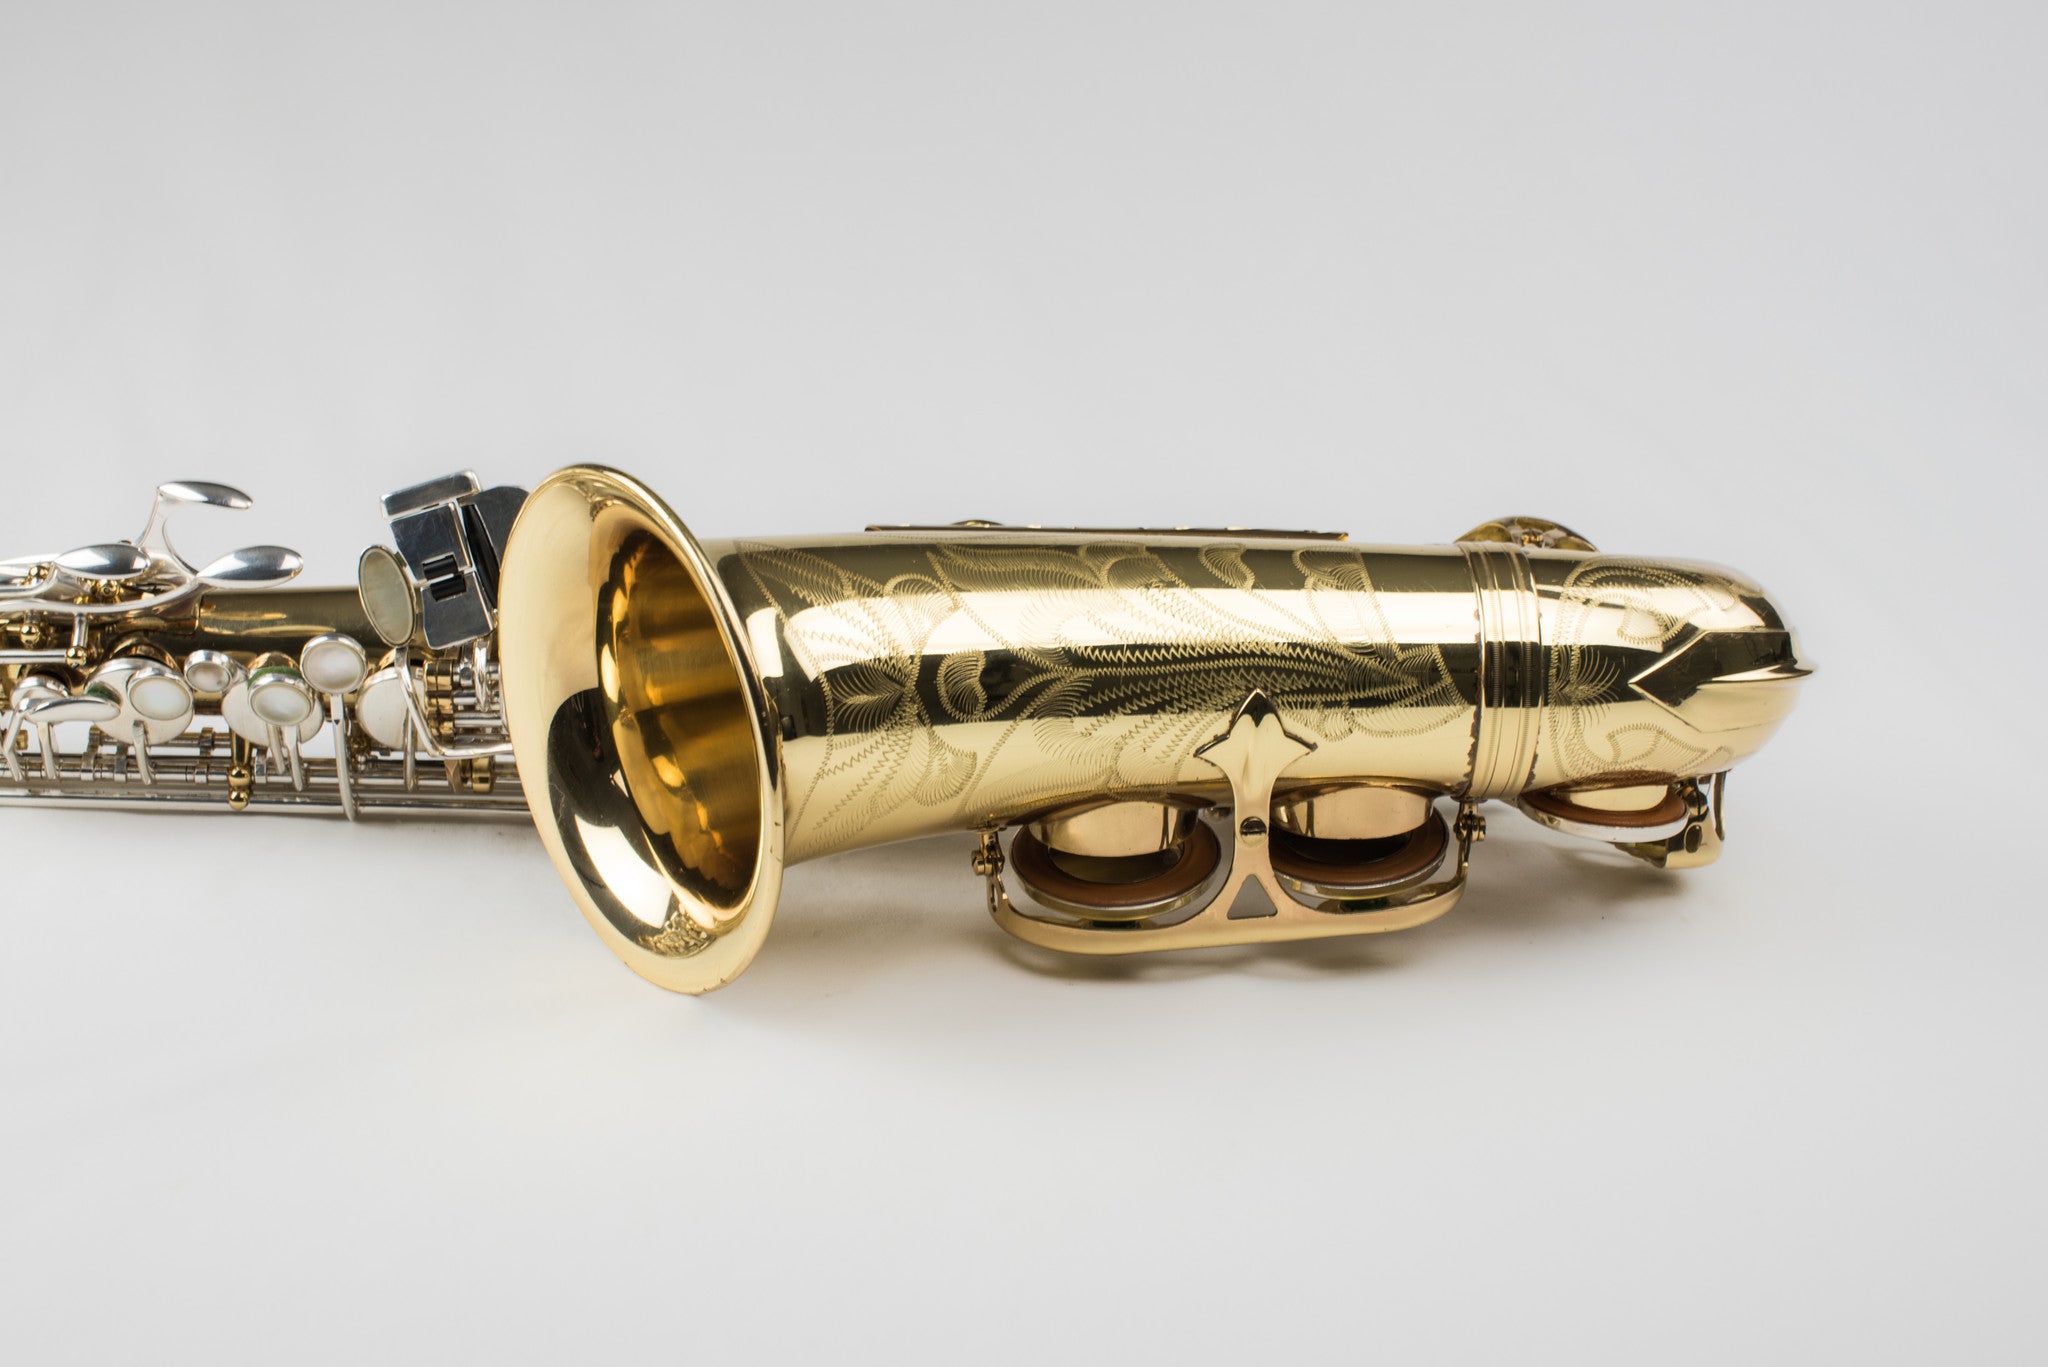 Selmer Super Action Series II Alto Saxophone with Silver Keys